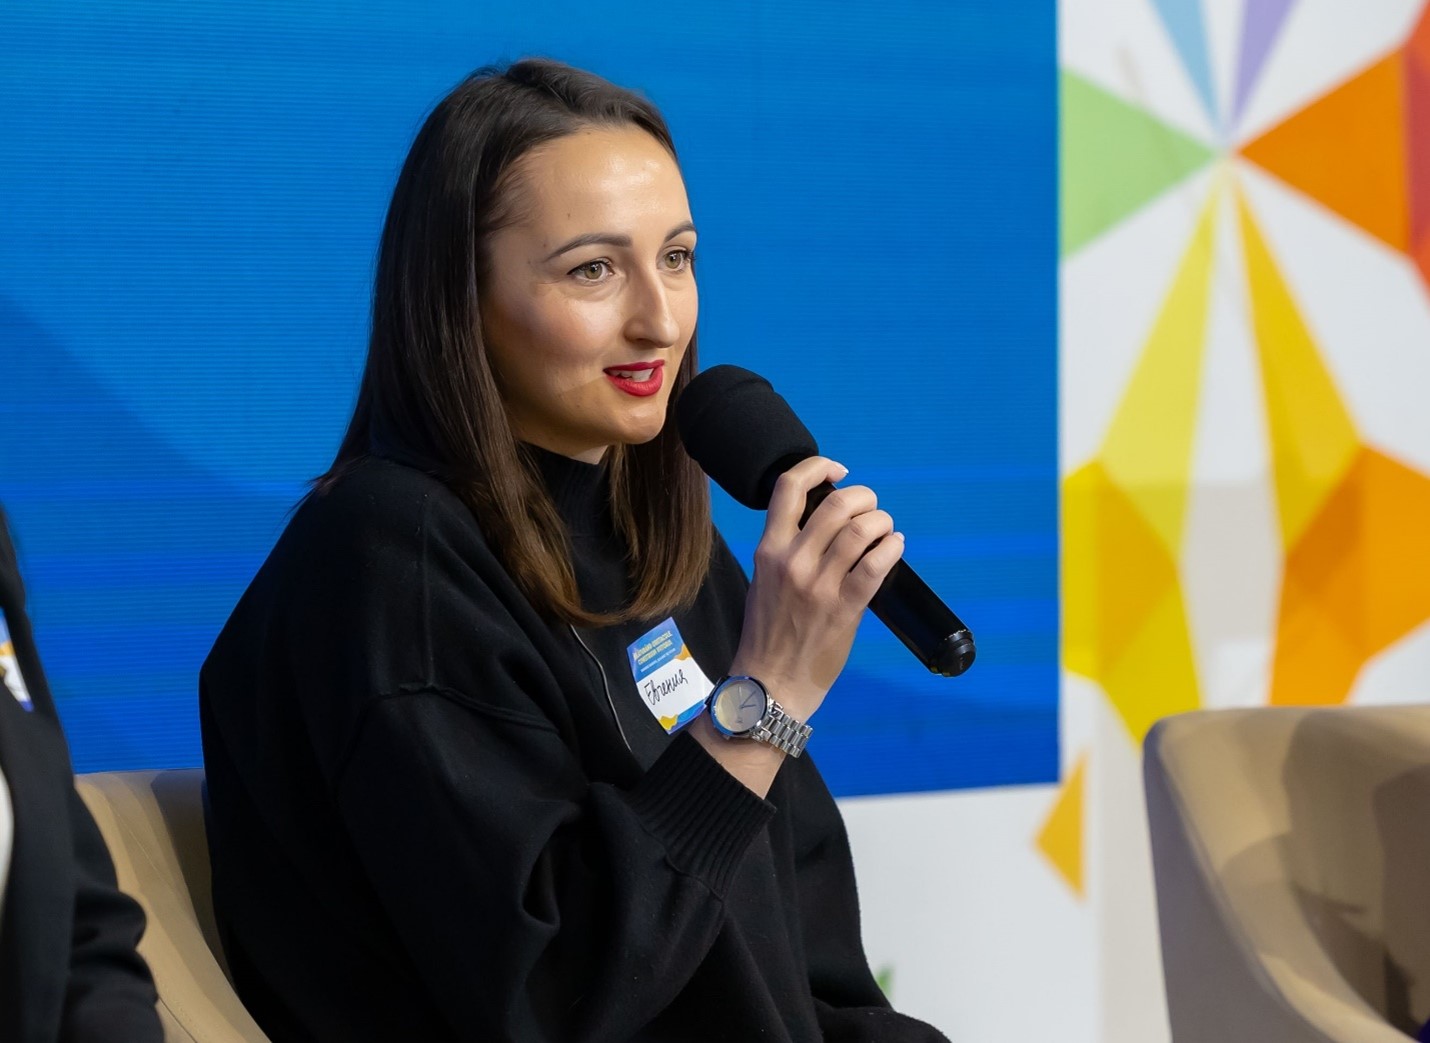 Evghenia Hutsuleac shares insights from her journey as a WoW programme beneficiary during the final event of the project "Strengthening the socioeconomic resilience of women and girls affected by the Ukrainian refugee crisis in Moldova." Photo credit: UN Women Moldova